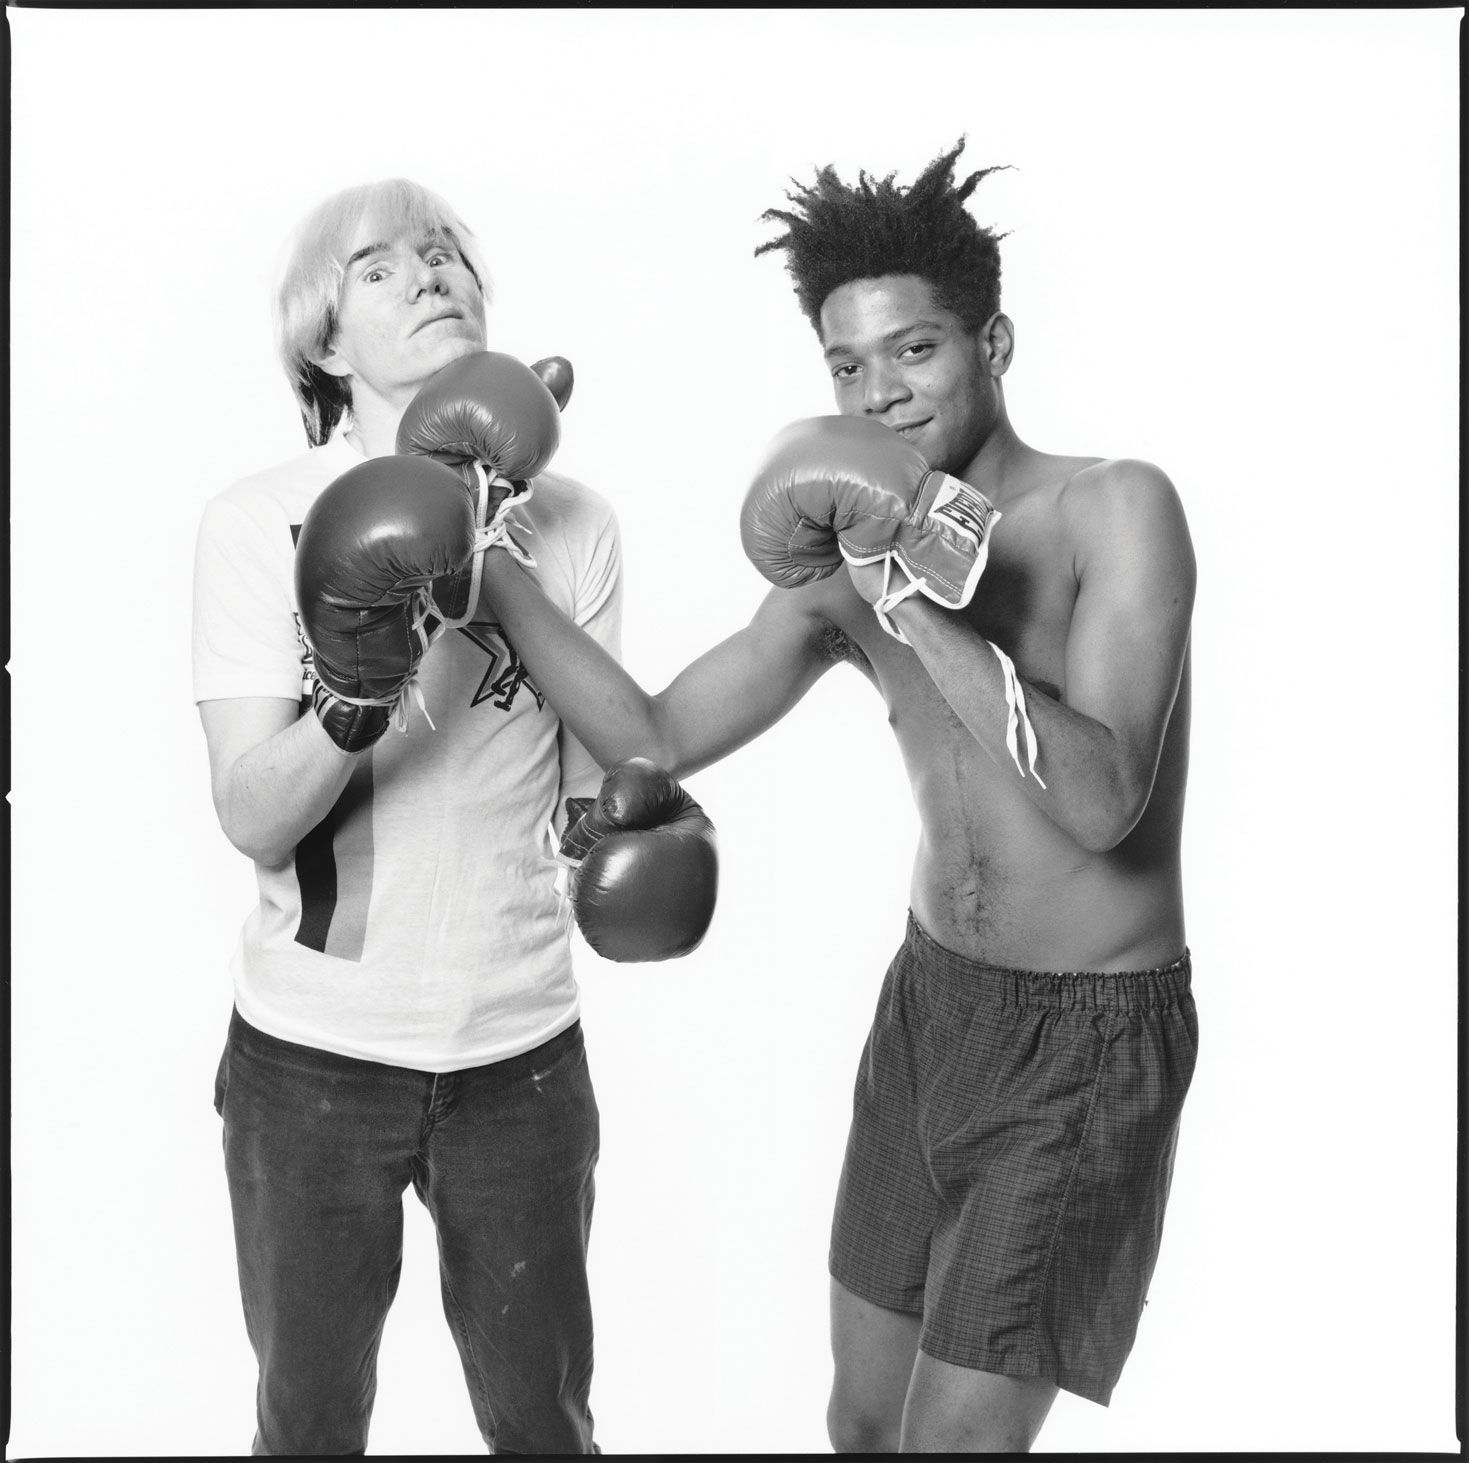 Andy Warhol and Jean-Michel Basquiat's collaboration examined in ...